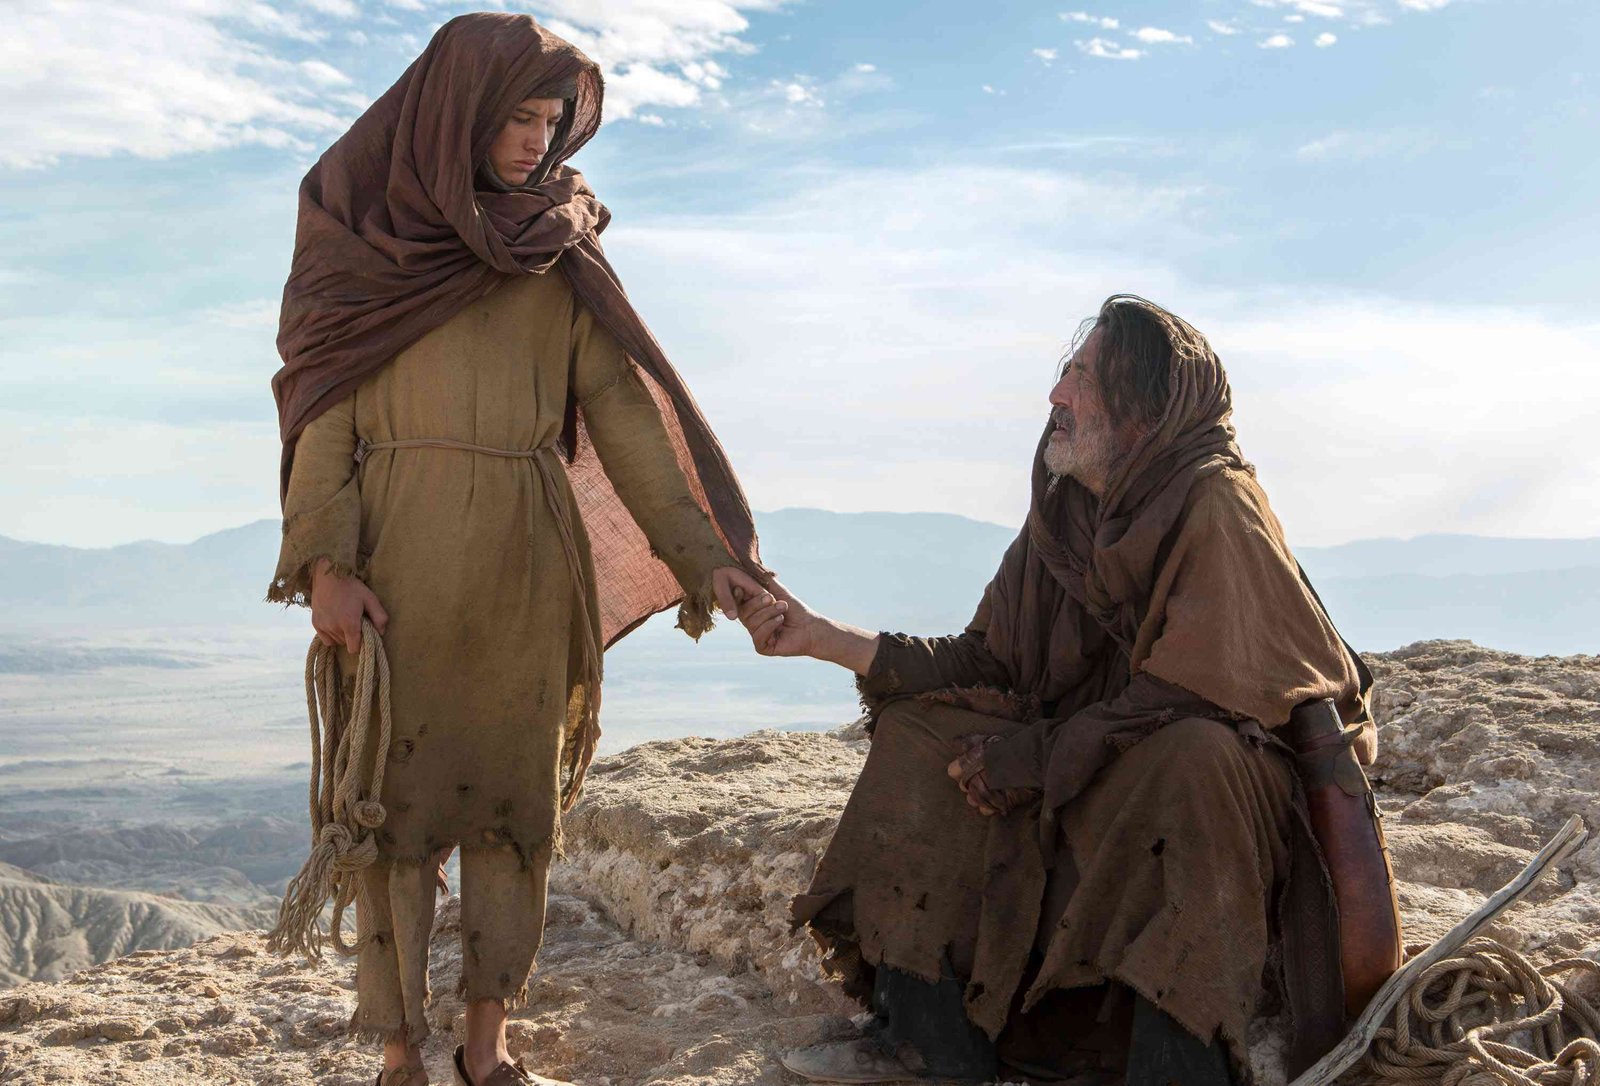 LDD_02525 (l to r) Tye Sheridan stars as 'Son' and Ciarán Hinds as 'Father' in the imagined chapter of Jesus' forty days of fasting and praying, LAST DAYS IN THE DESERT, a Broad Green Pictures release. Credit: Gilles Mingasson / Broad Green Pictures